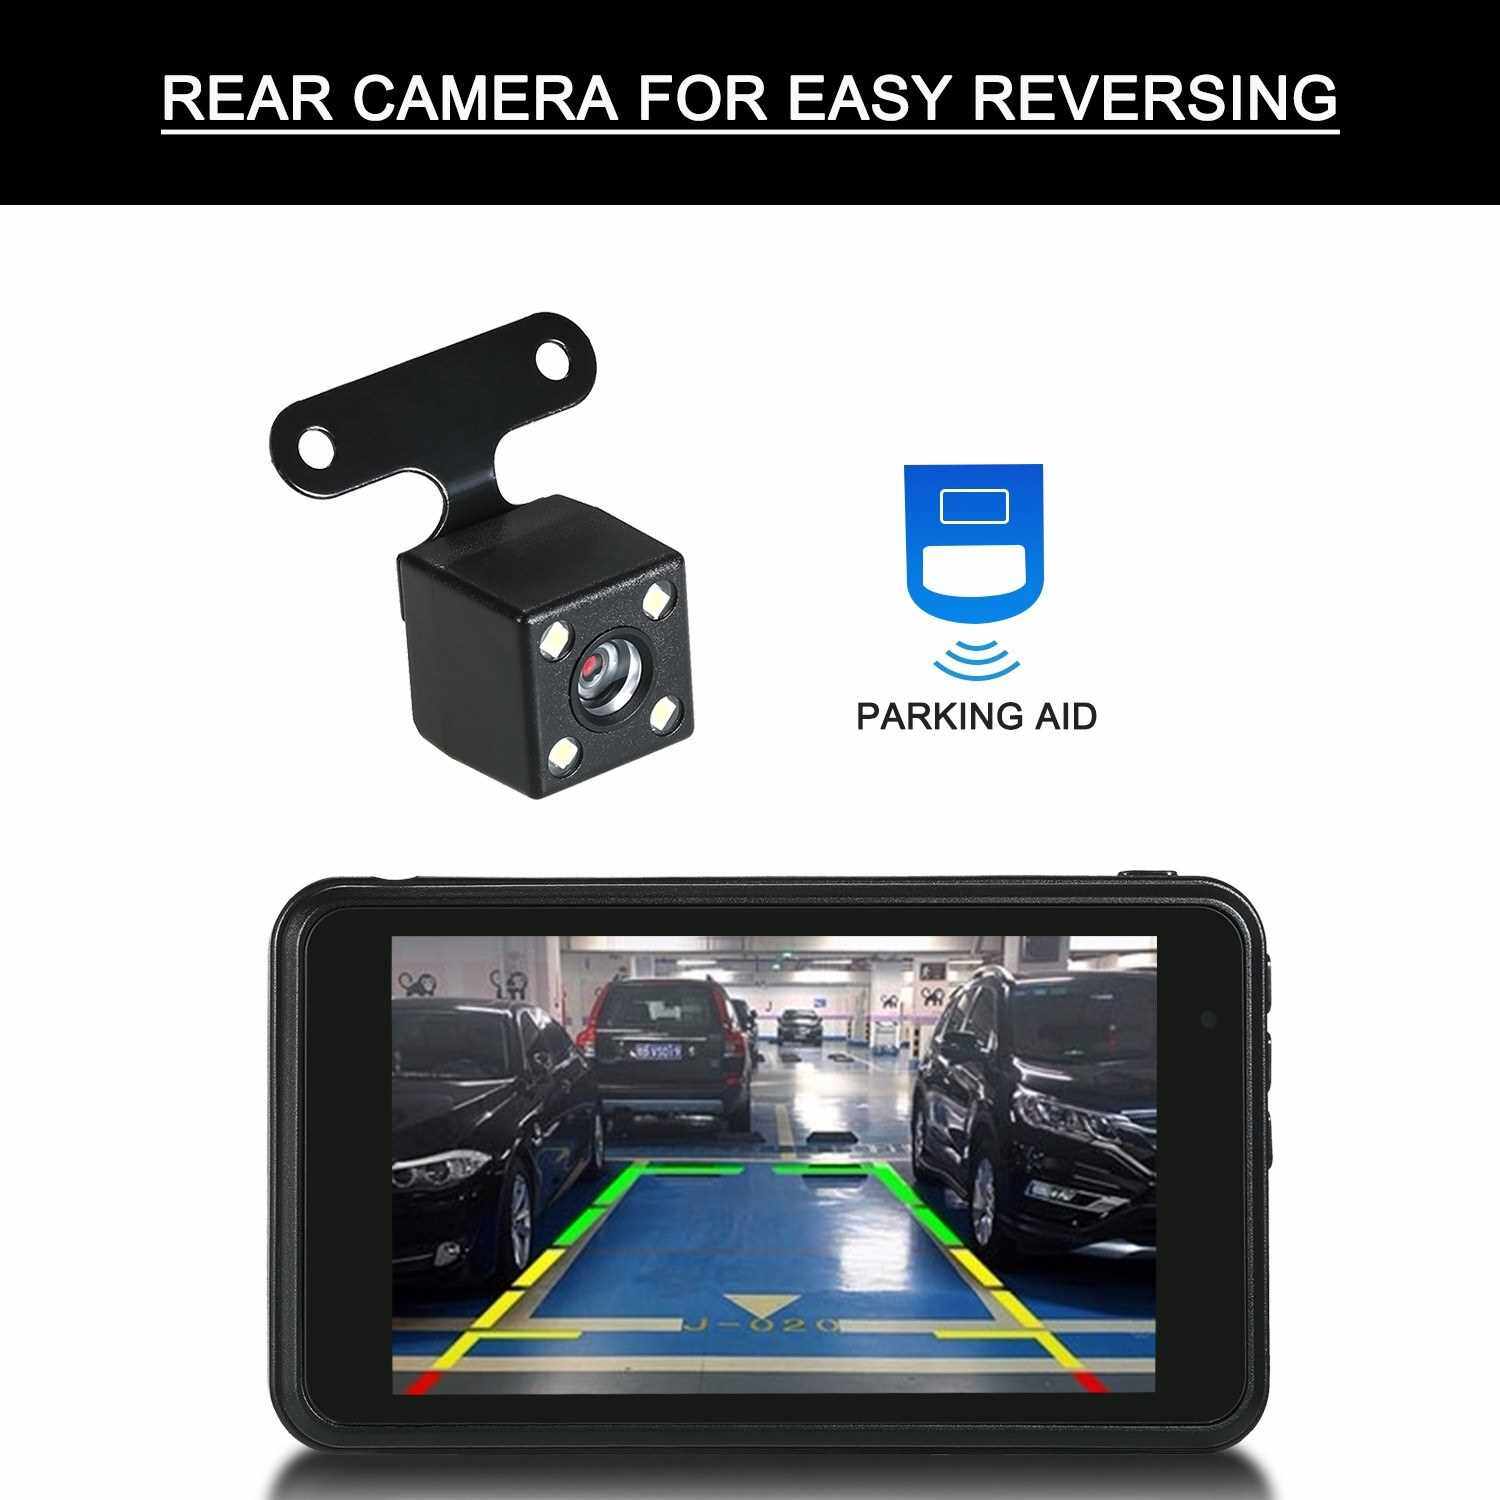 People's Choice 1080P FHD Car DVR 4inch Dash Cam Car Driving Recorder Dual Lens Vehicle Camcorder Loop-cycle Recording G-sensor Motion Detection Parking Monitor (Standard)